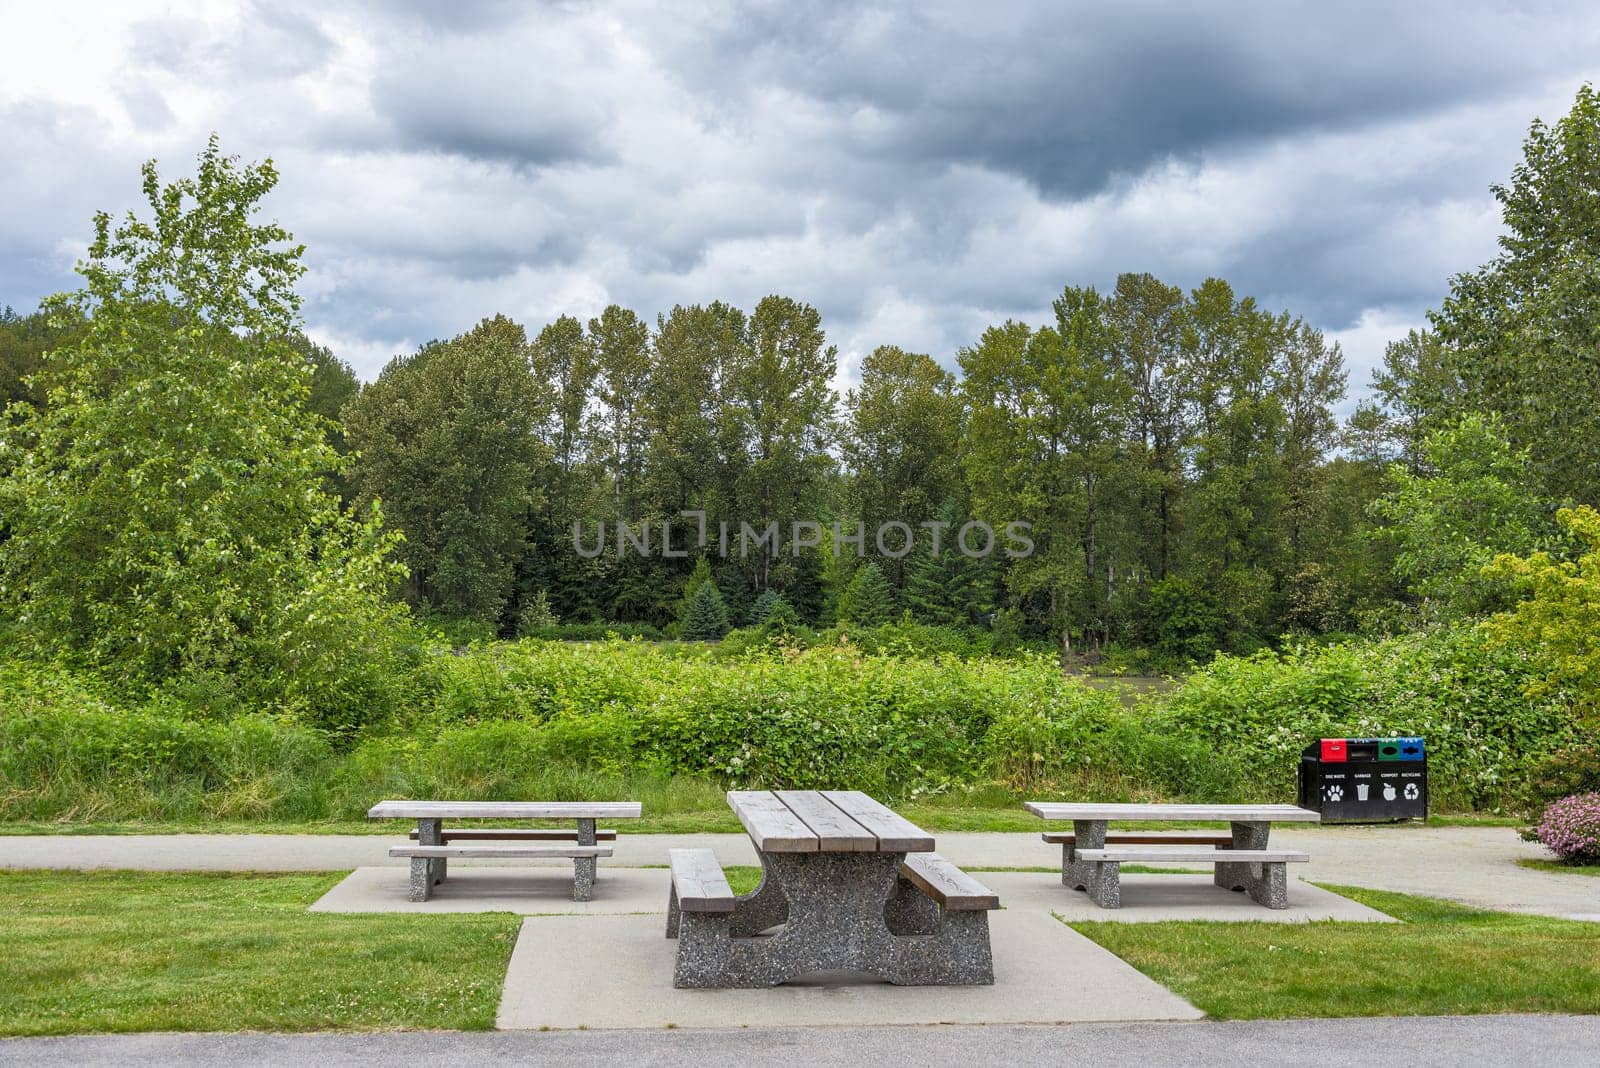 Picnic table and benches on green lawn in a park at the river